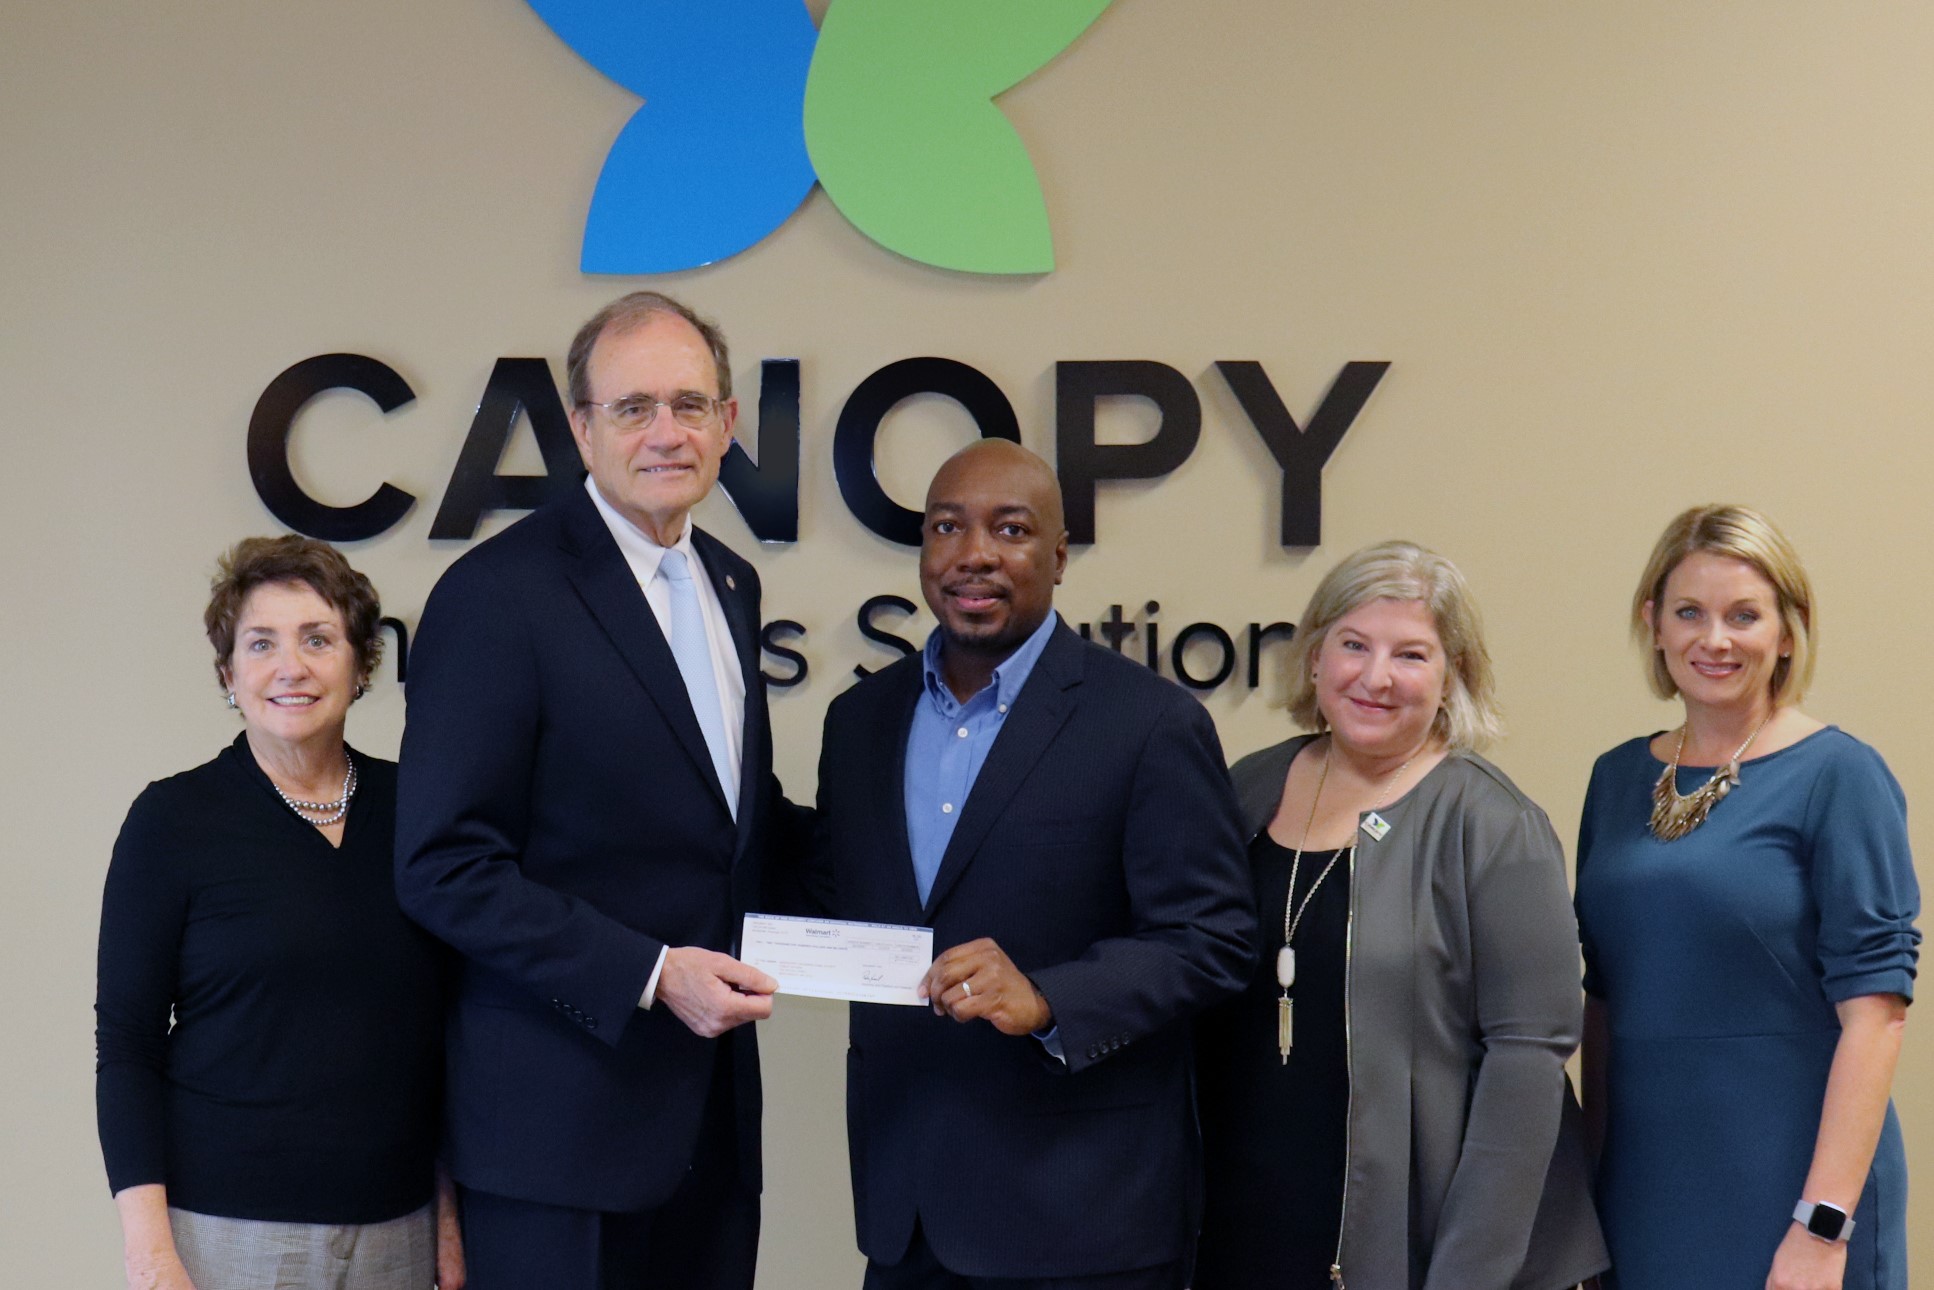 Canopy Selected as Recipient of Walmart Donation Aimed at Advancing Autism Solutions